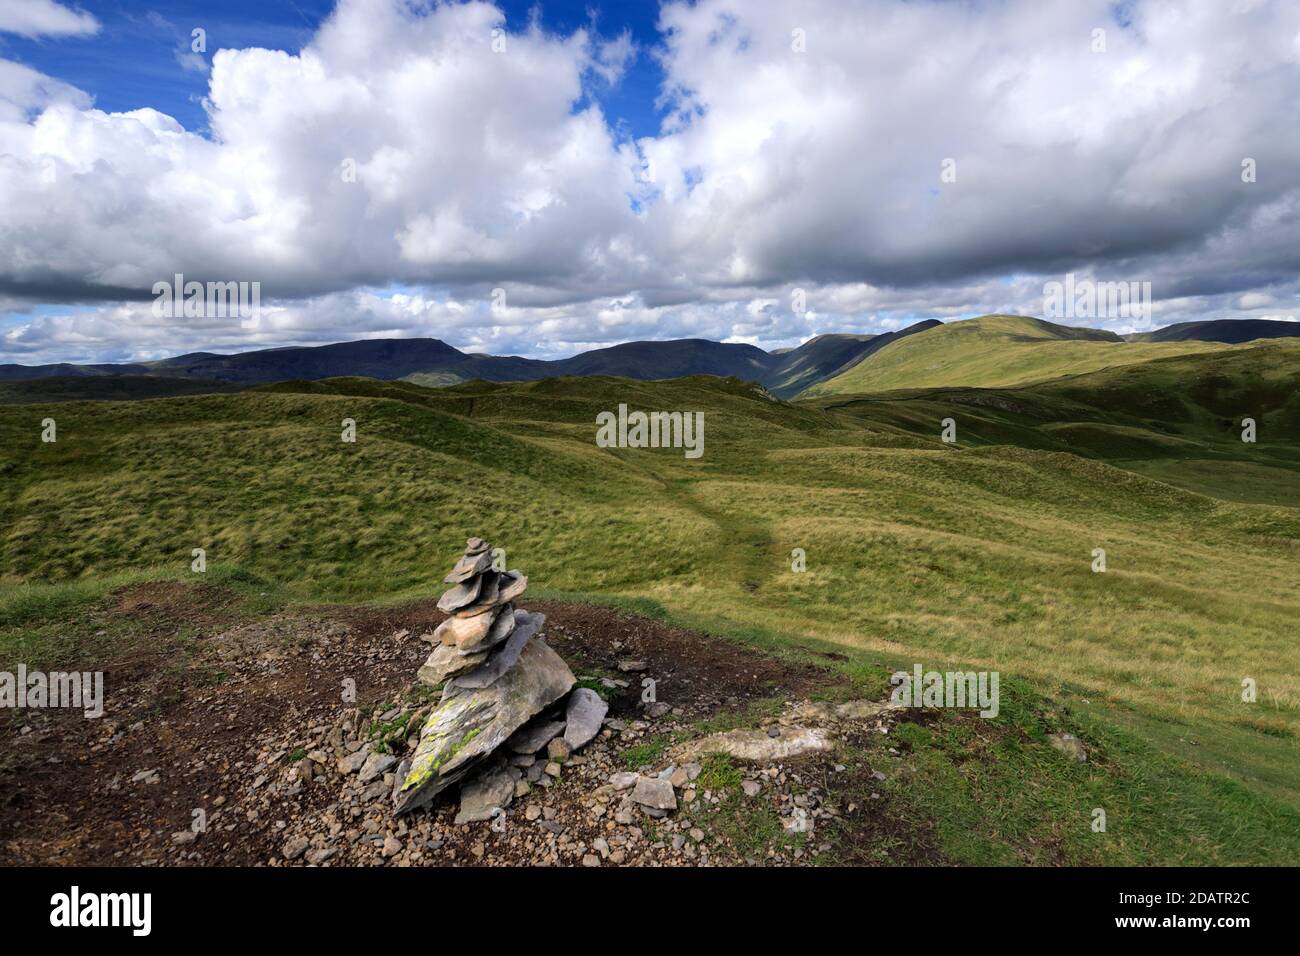 The Summit Cairn of Sour Howes fell, Troutbeck village, Kirkstone pass, Lake District National Park, Cumbria, England, UK Sour Howes fell is one of th Stock Photo